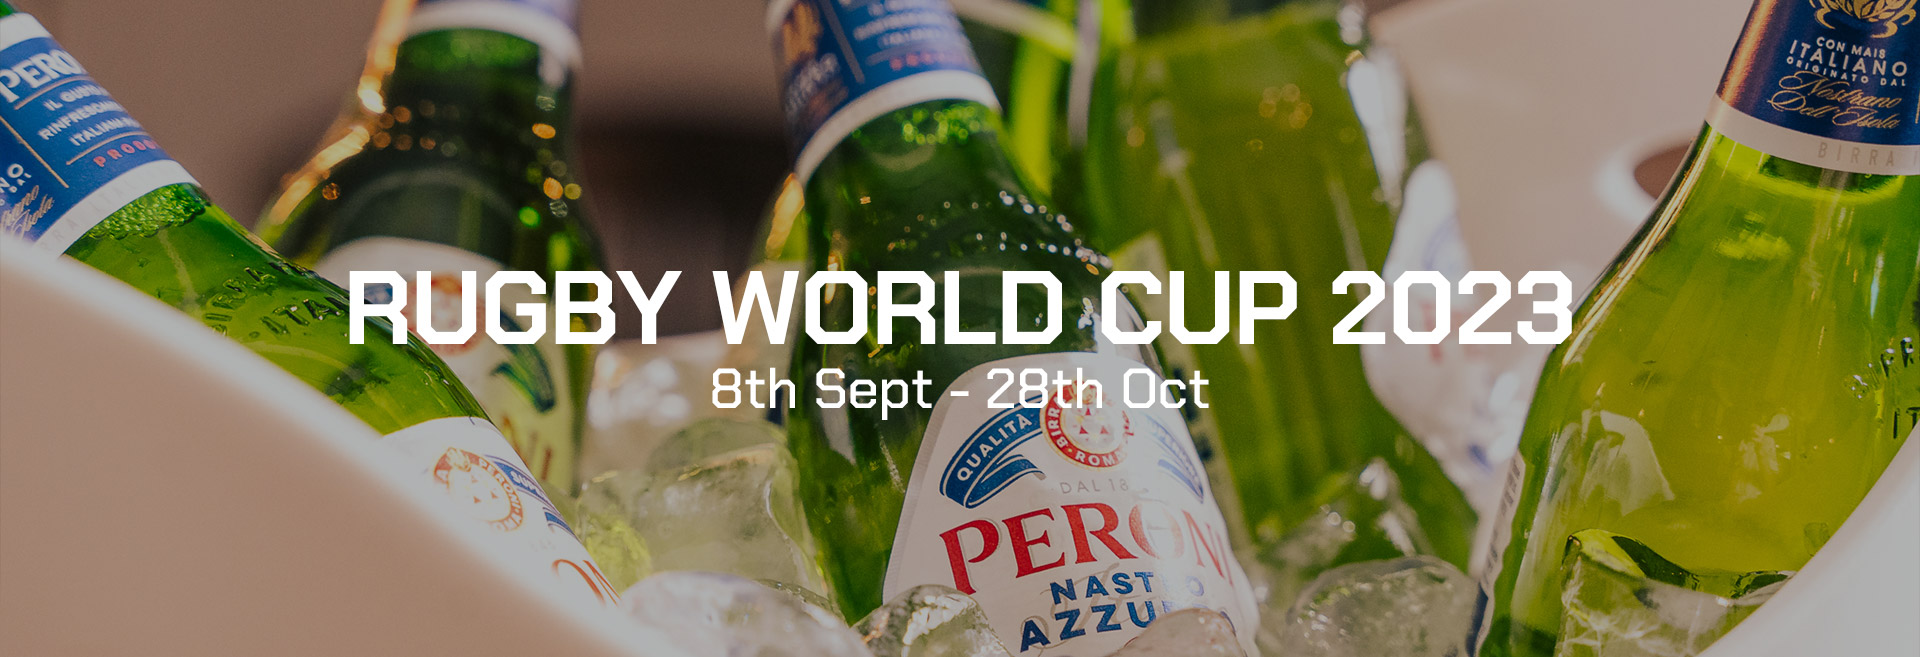 Watch the Rugby World Cup at Oakford Social Club